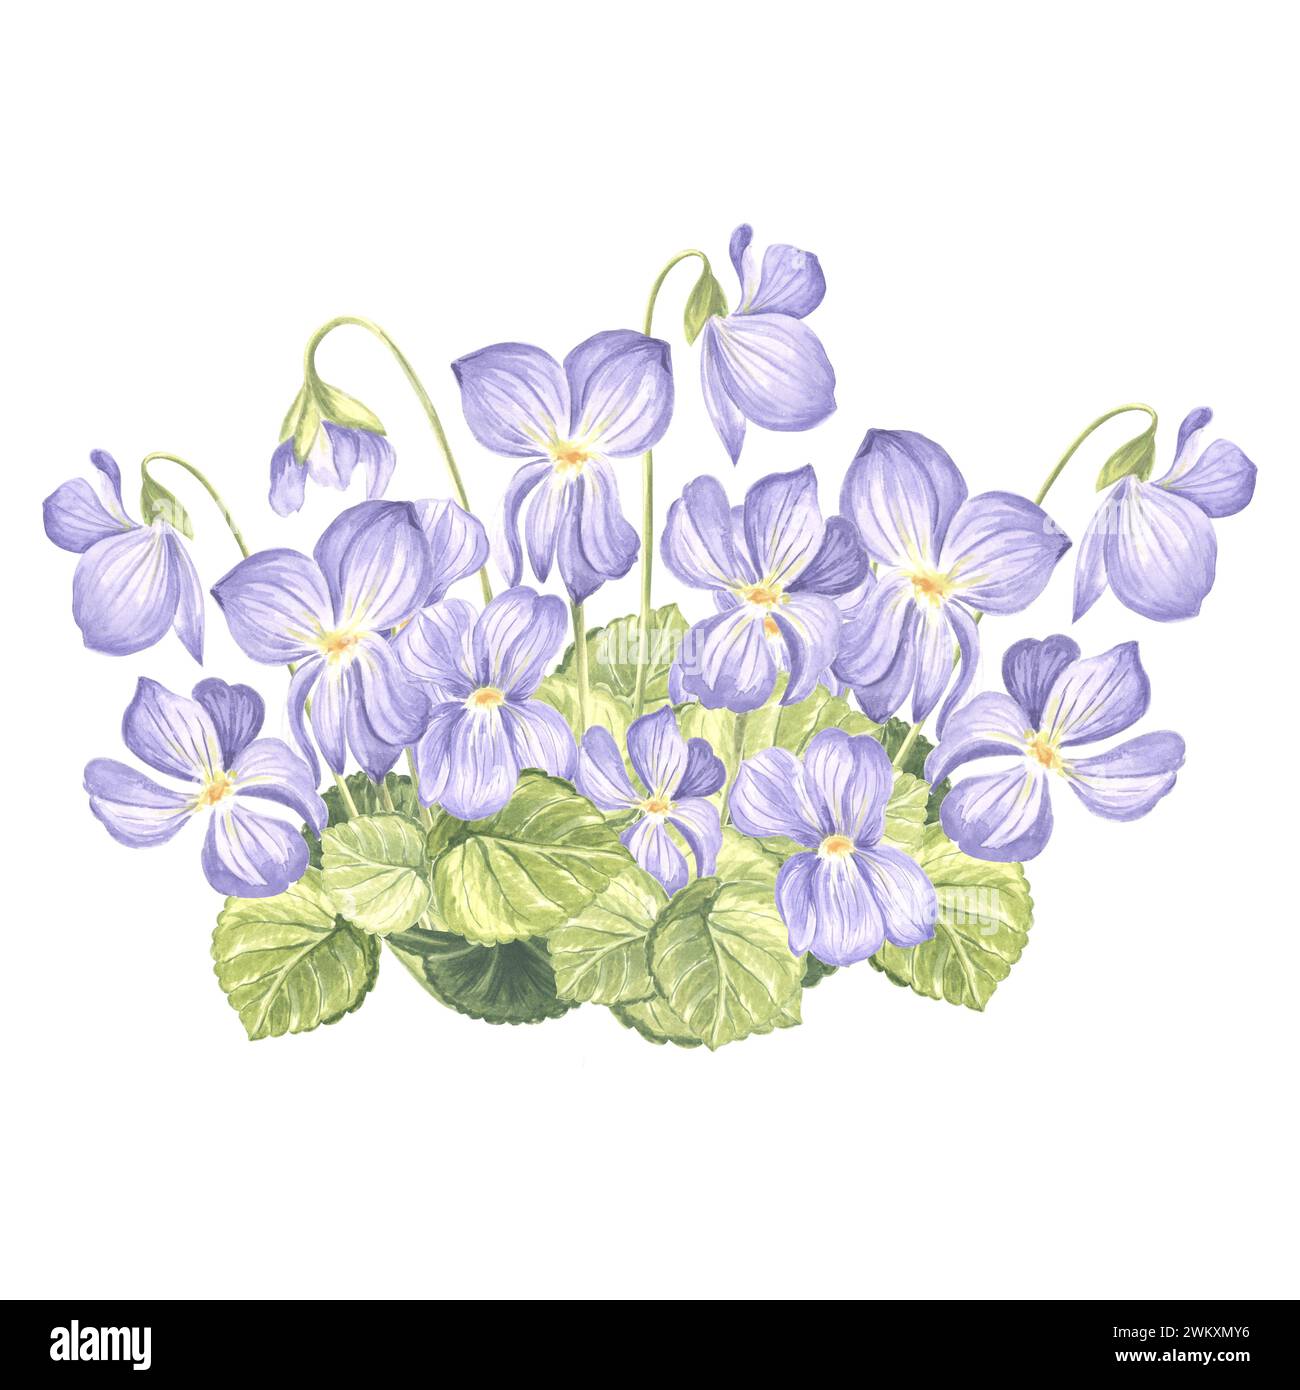 Watercolor wild violets with leaves and buds. Composition of pansy flower. Isolated hand drawn illustration of spring blossom. Template for card, pack Stock Photo